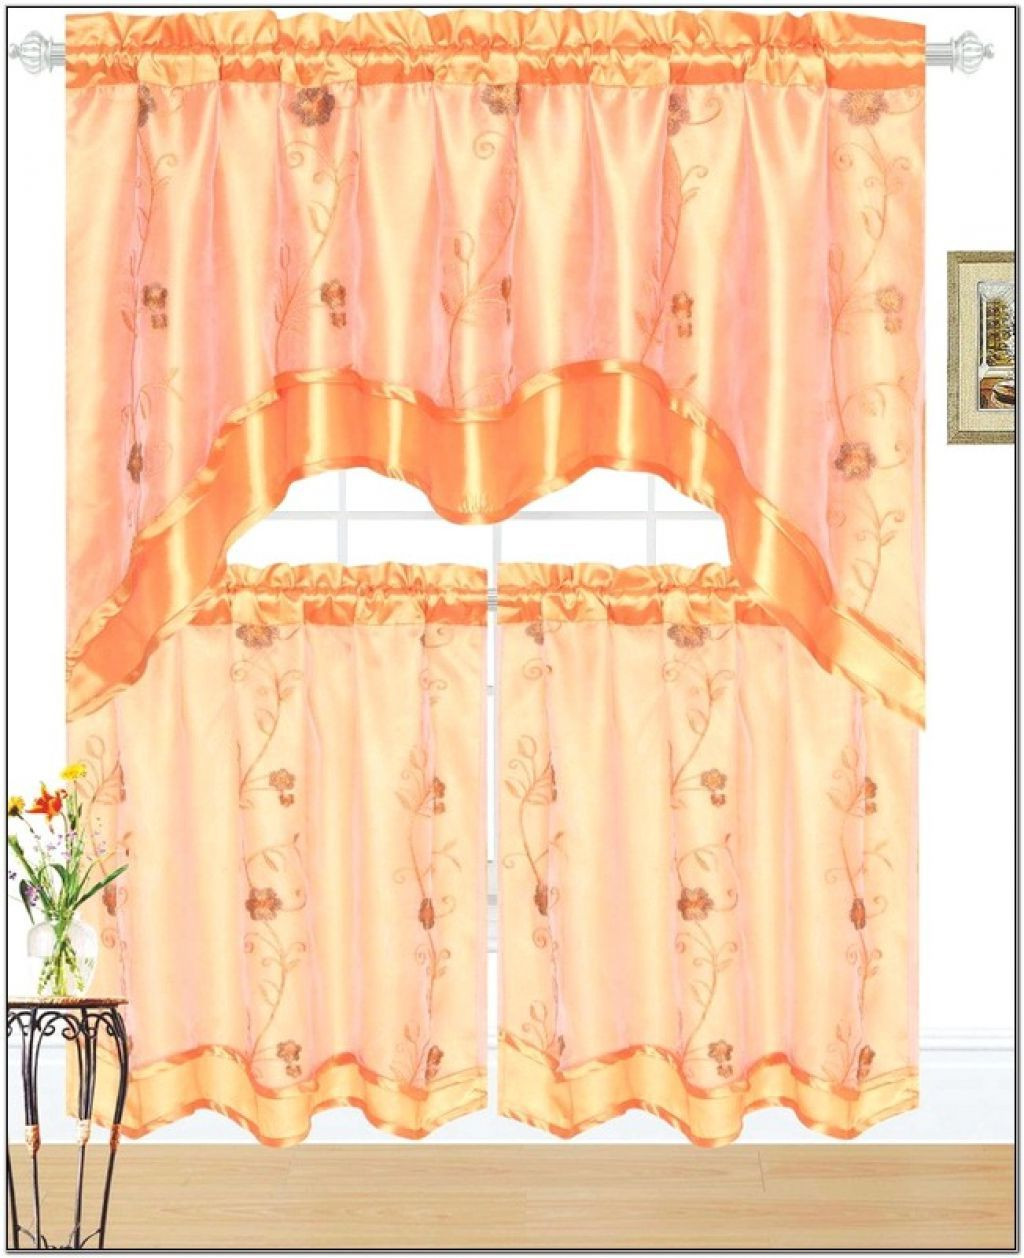 Jc Penneys Kitchen Curtains
 Jcpenney Kitchen Curtain – stylish Drape for Cooking Space